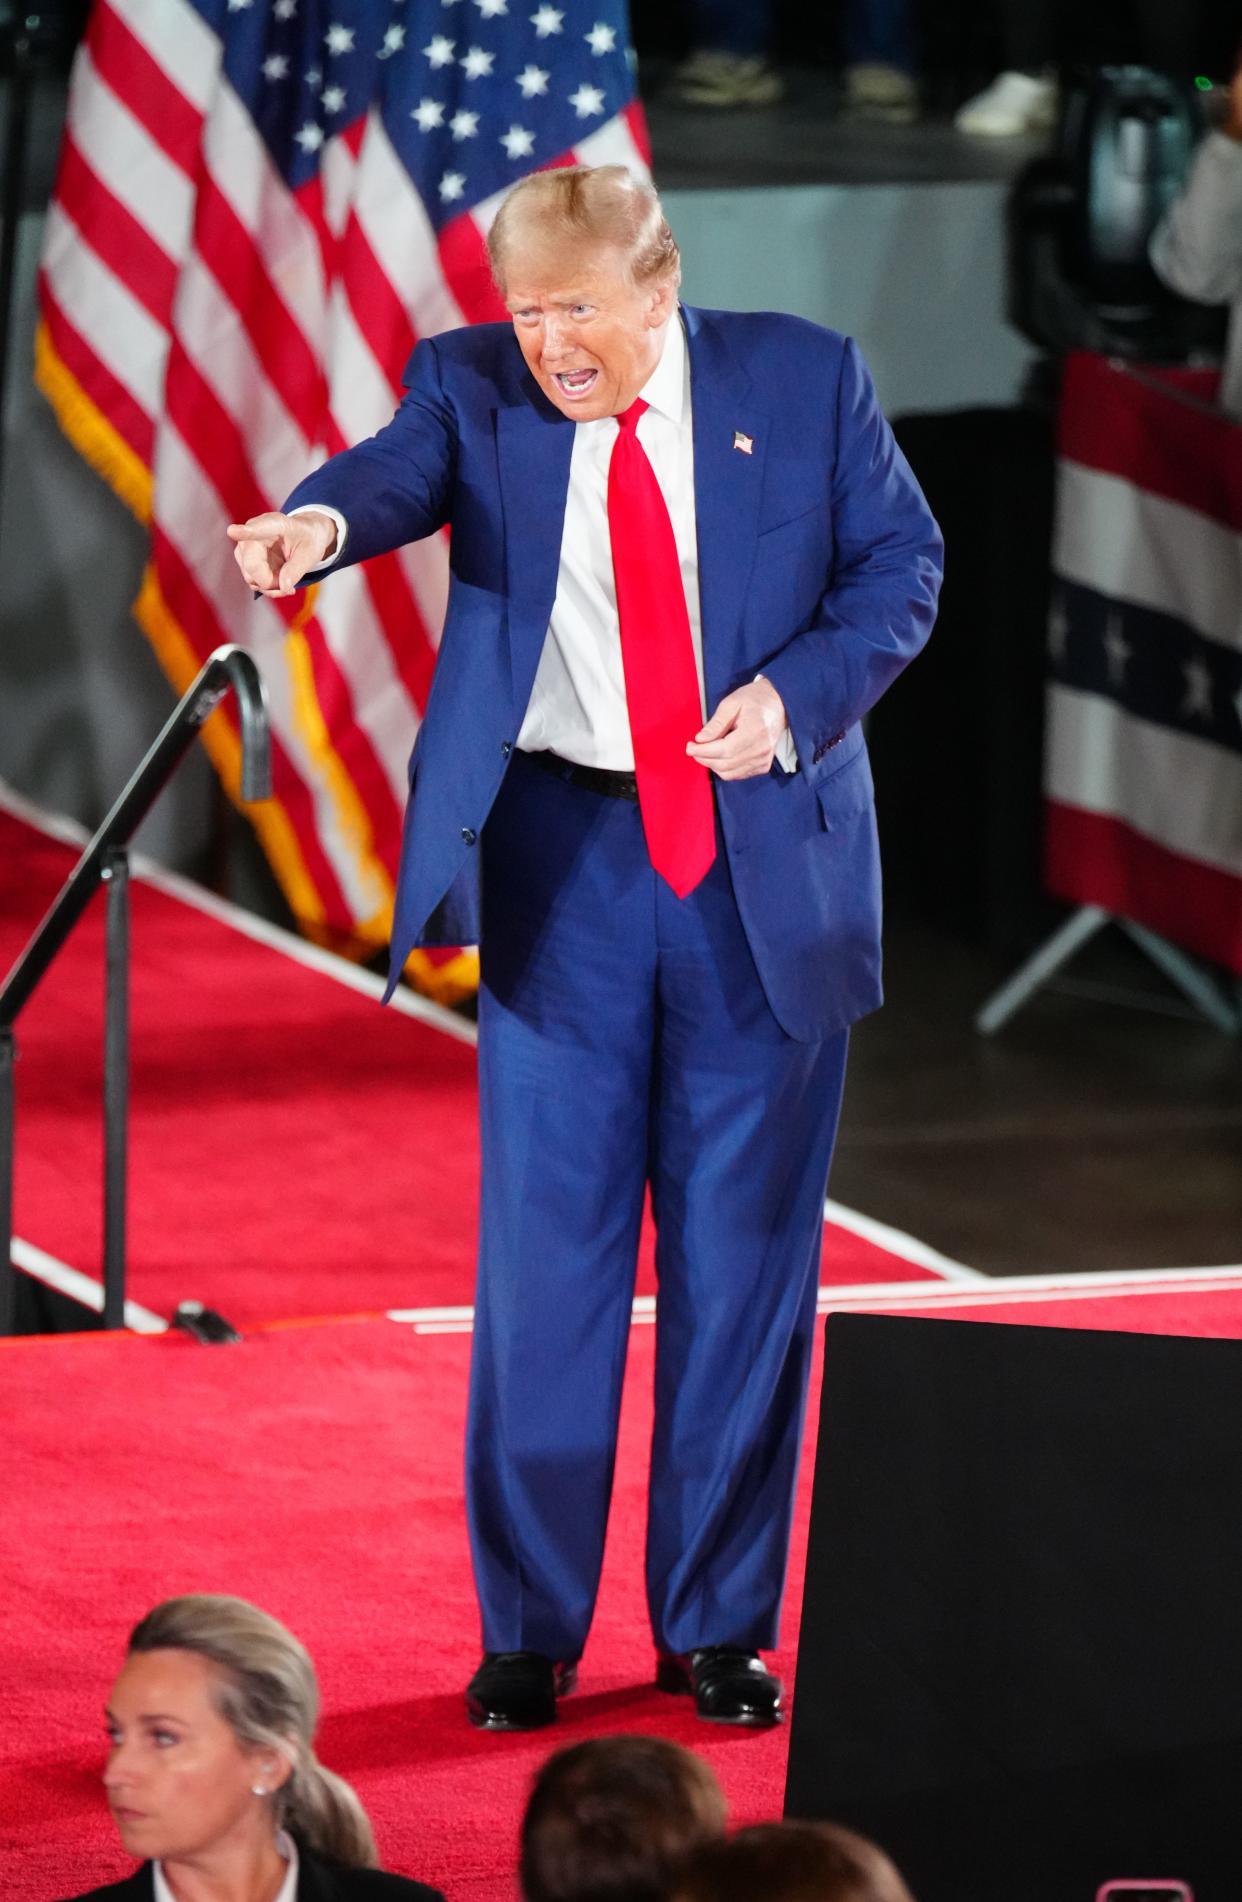 Former president Donald Trump acknowledges a supporter during his campaign rally on Wednesday, May 1, 2024 at the Waukesha County Expo Center in Waukesha, Wis.